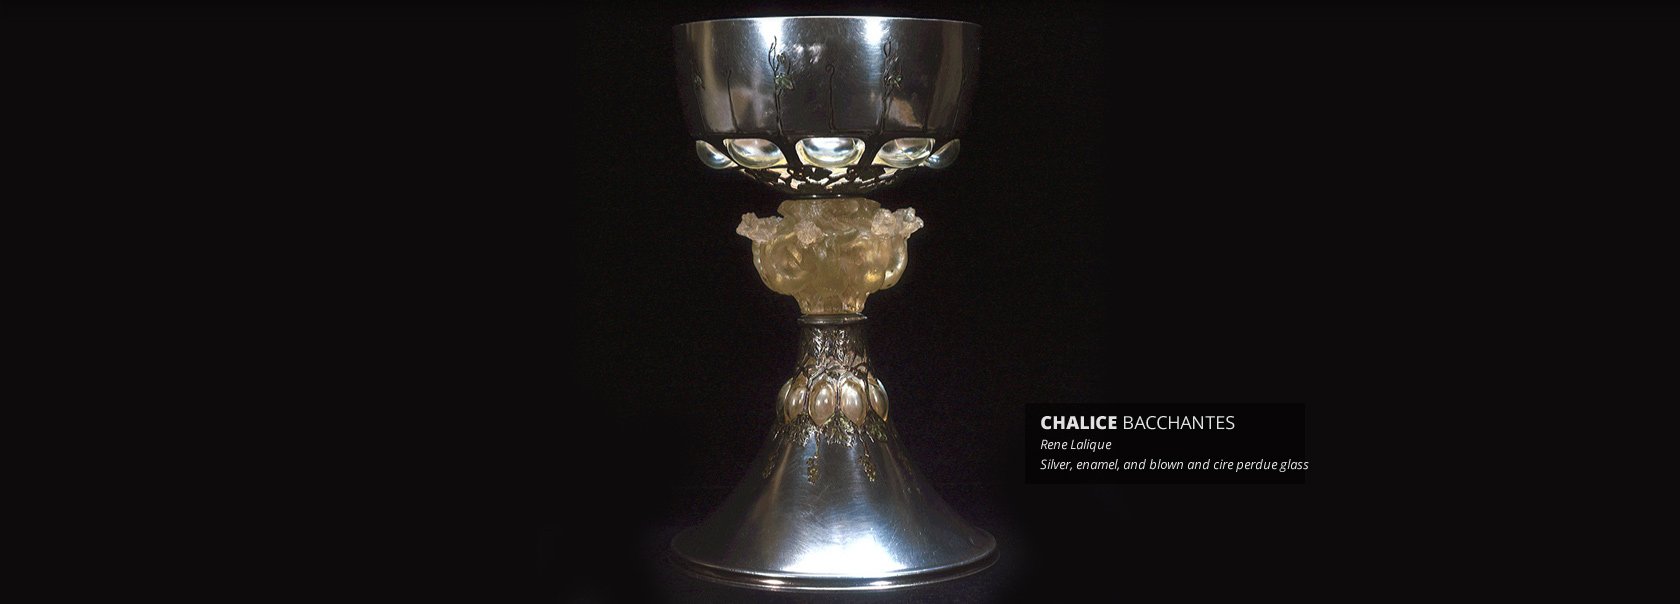 Chalice Bacchantes by Rene Lalique